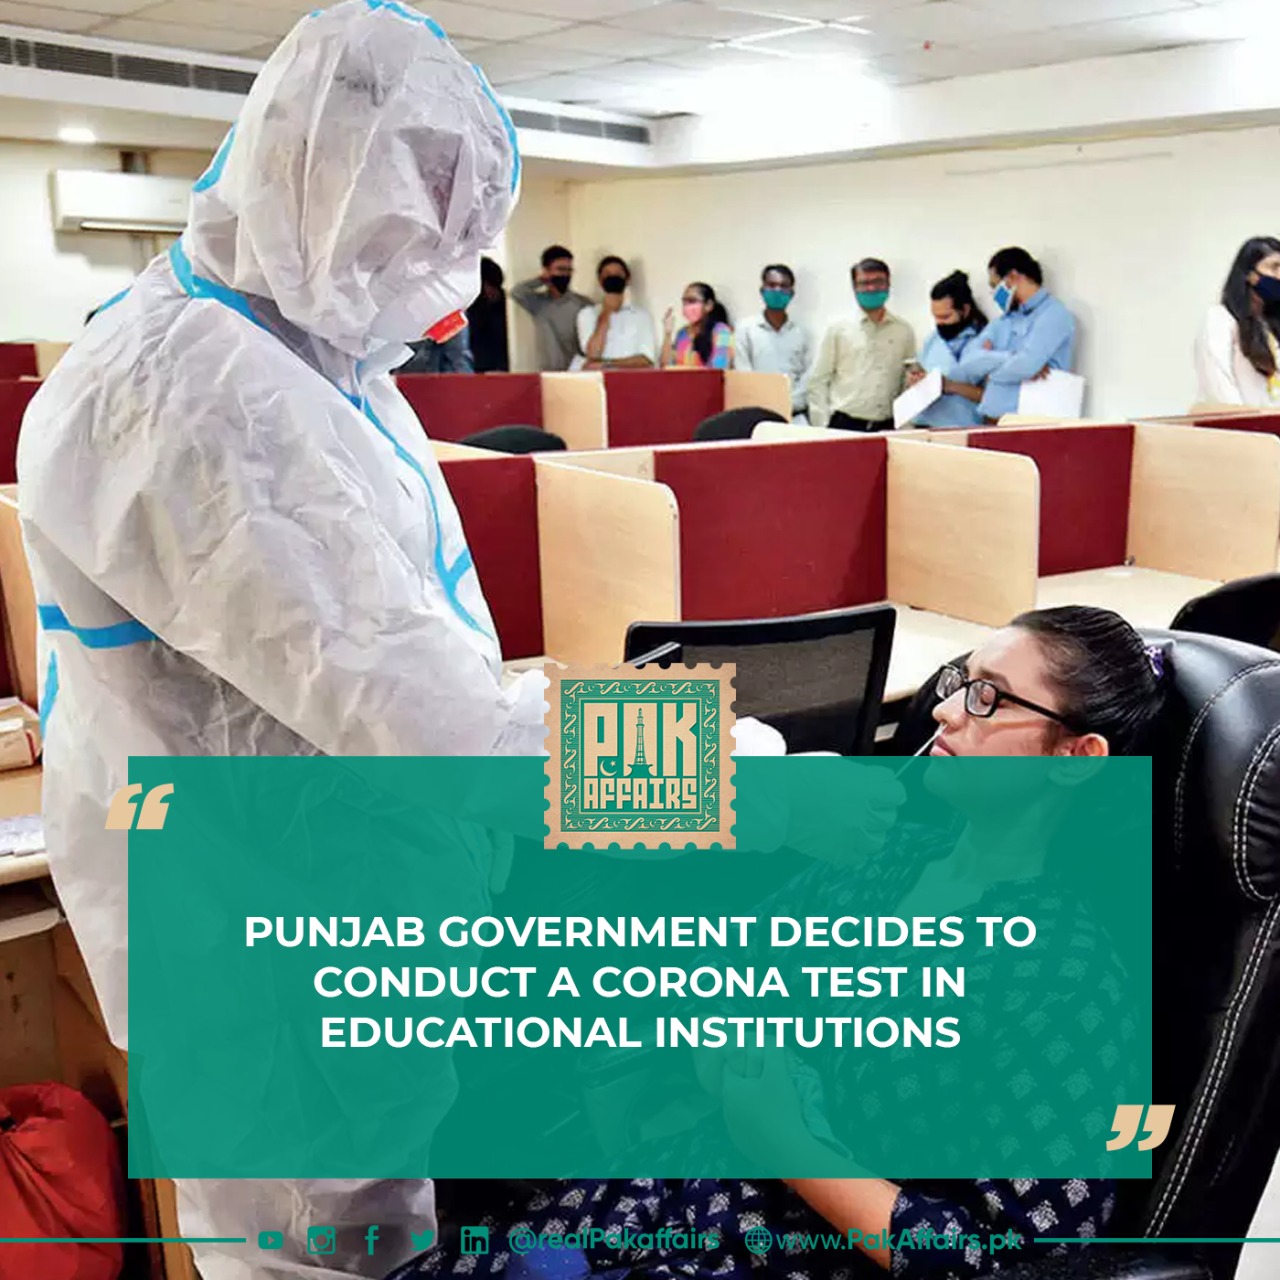 Punjab government decides to conduct a corona test in educational institutions.